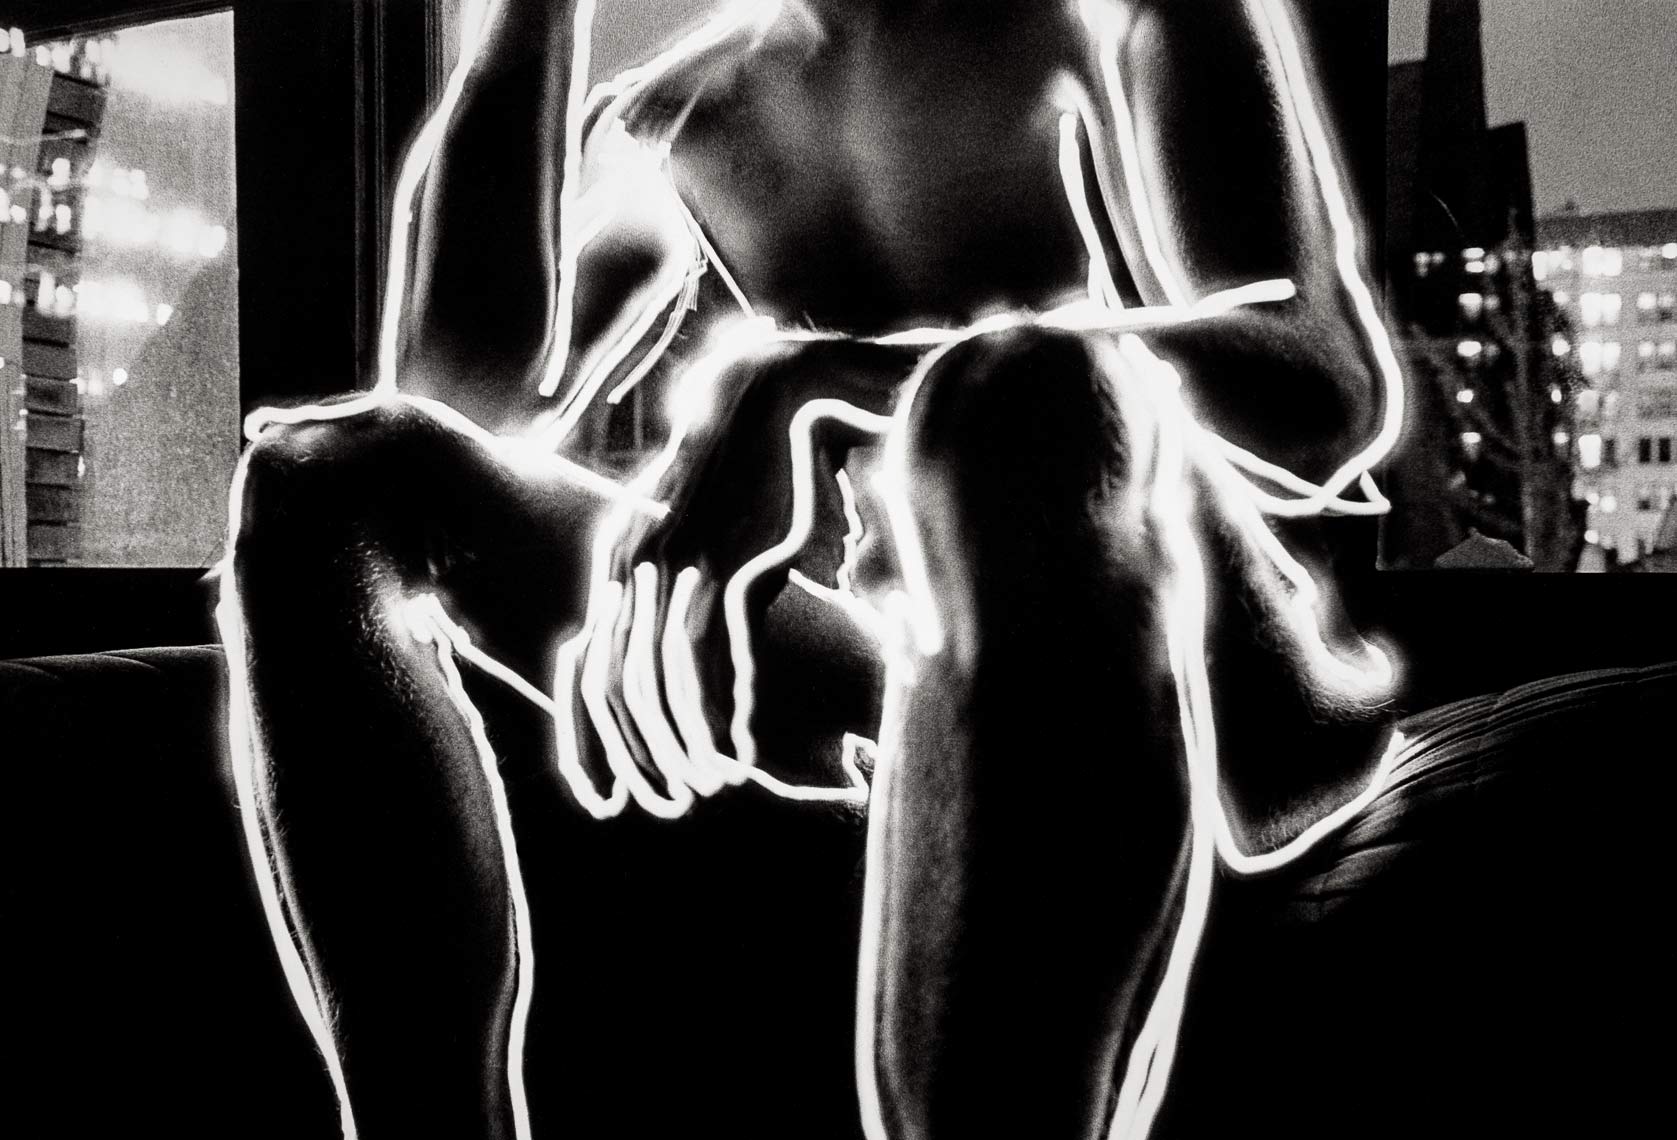 David Lebe; Paul Before 1981, male nude, light drawing, black and white photograph